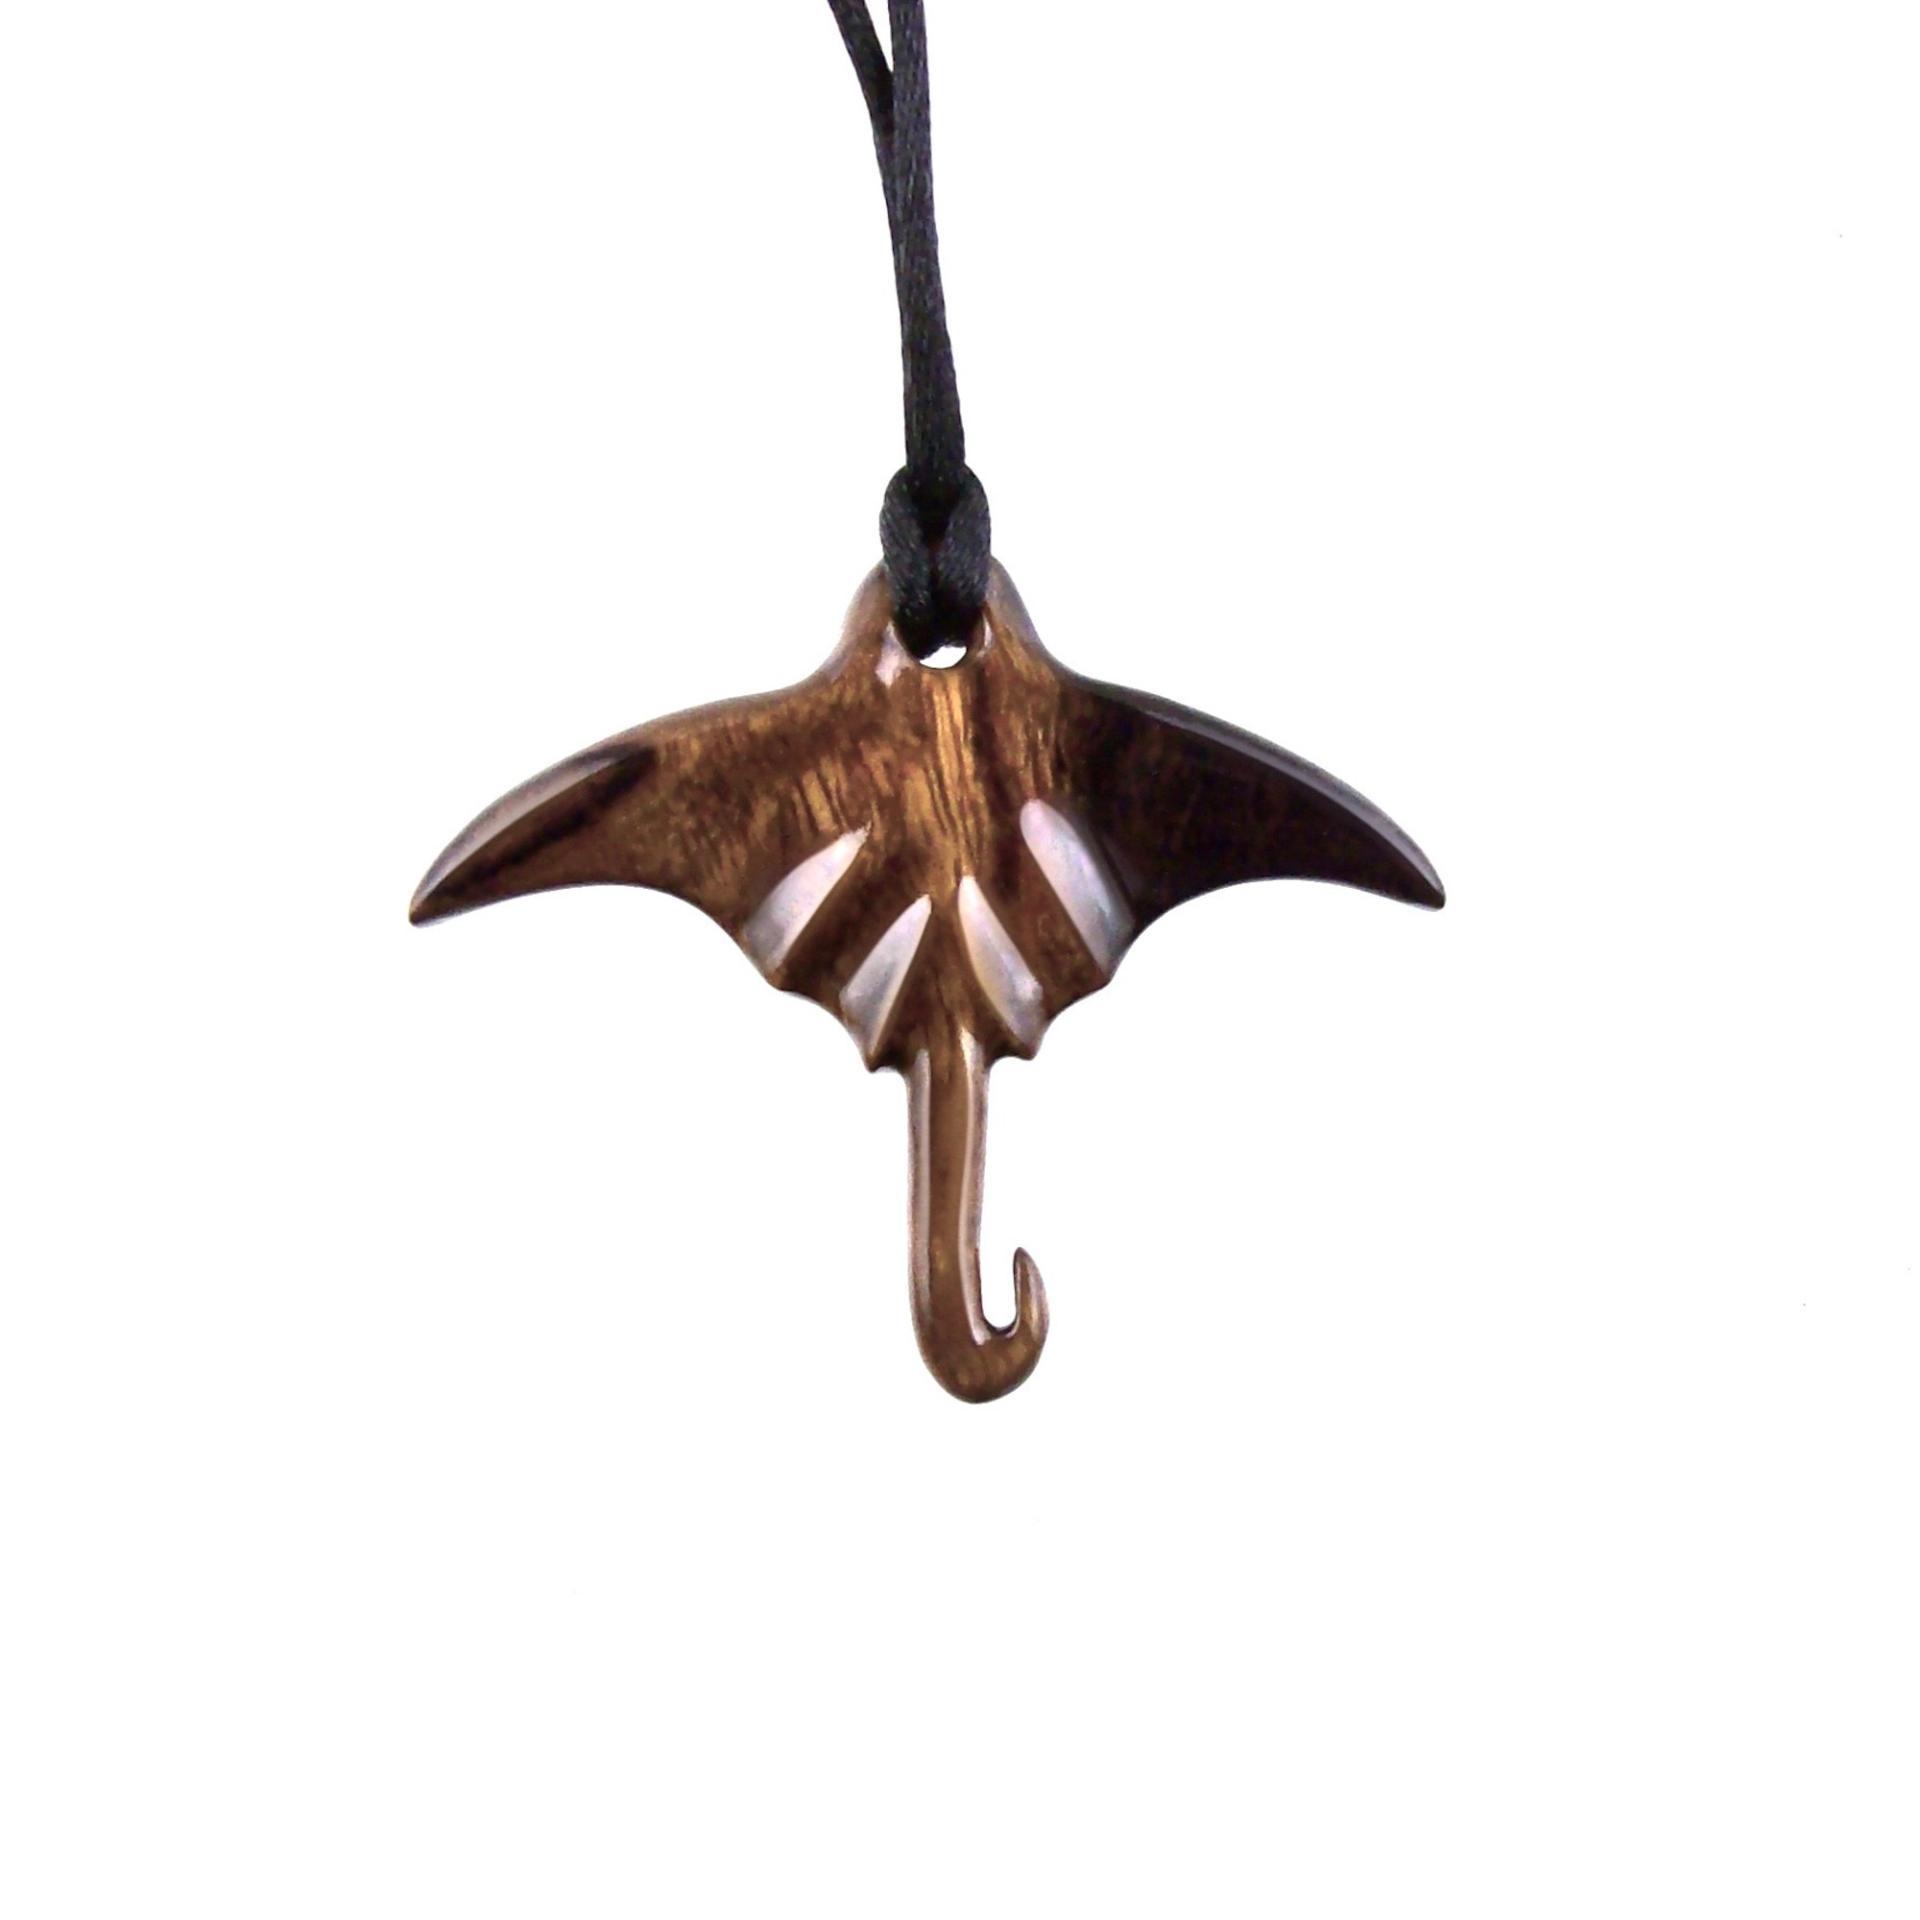 Hand Carved Manta Ray Necklace, Wooden Stingray Pendant, Mens Wood Necklace, Nautical Jewelry, One of a Kind Gift for Him